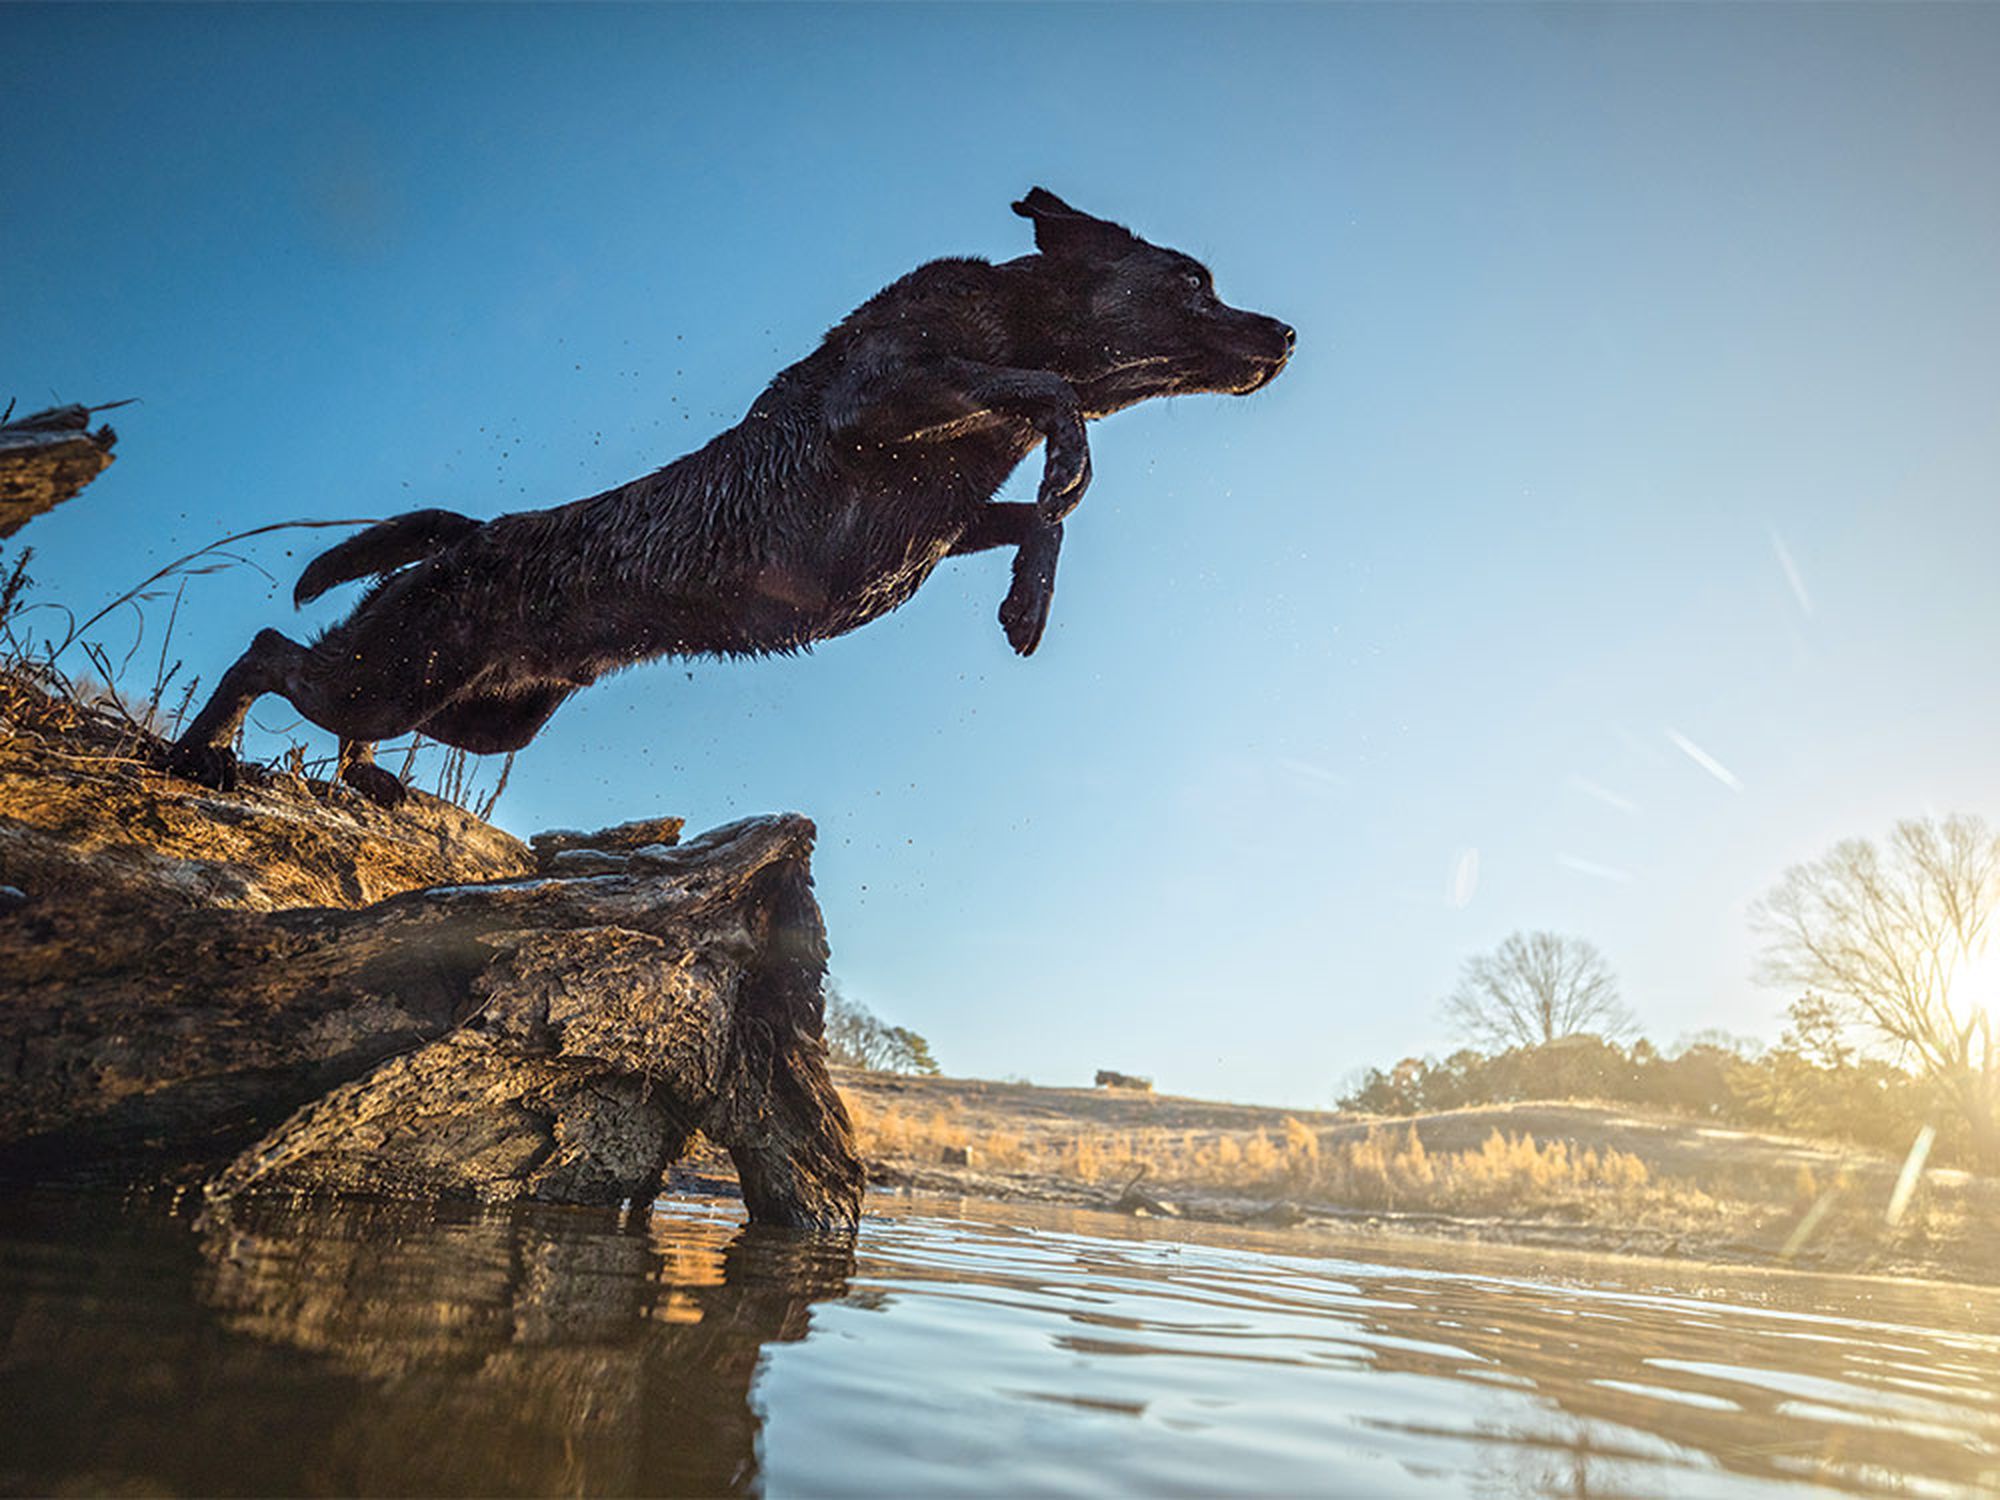 A tuned-up Labrador retriever dives in after a downed bird.